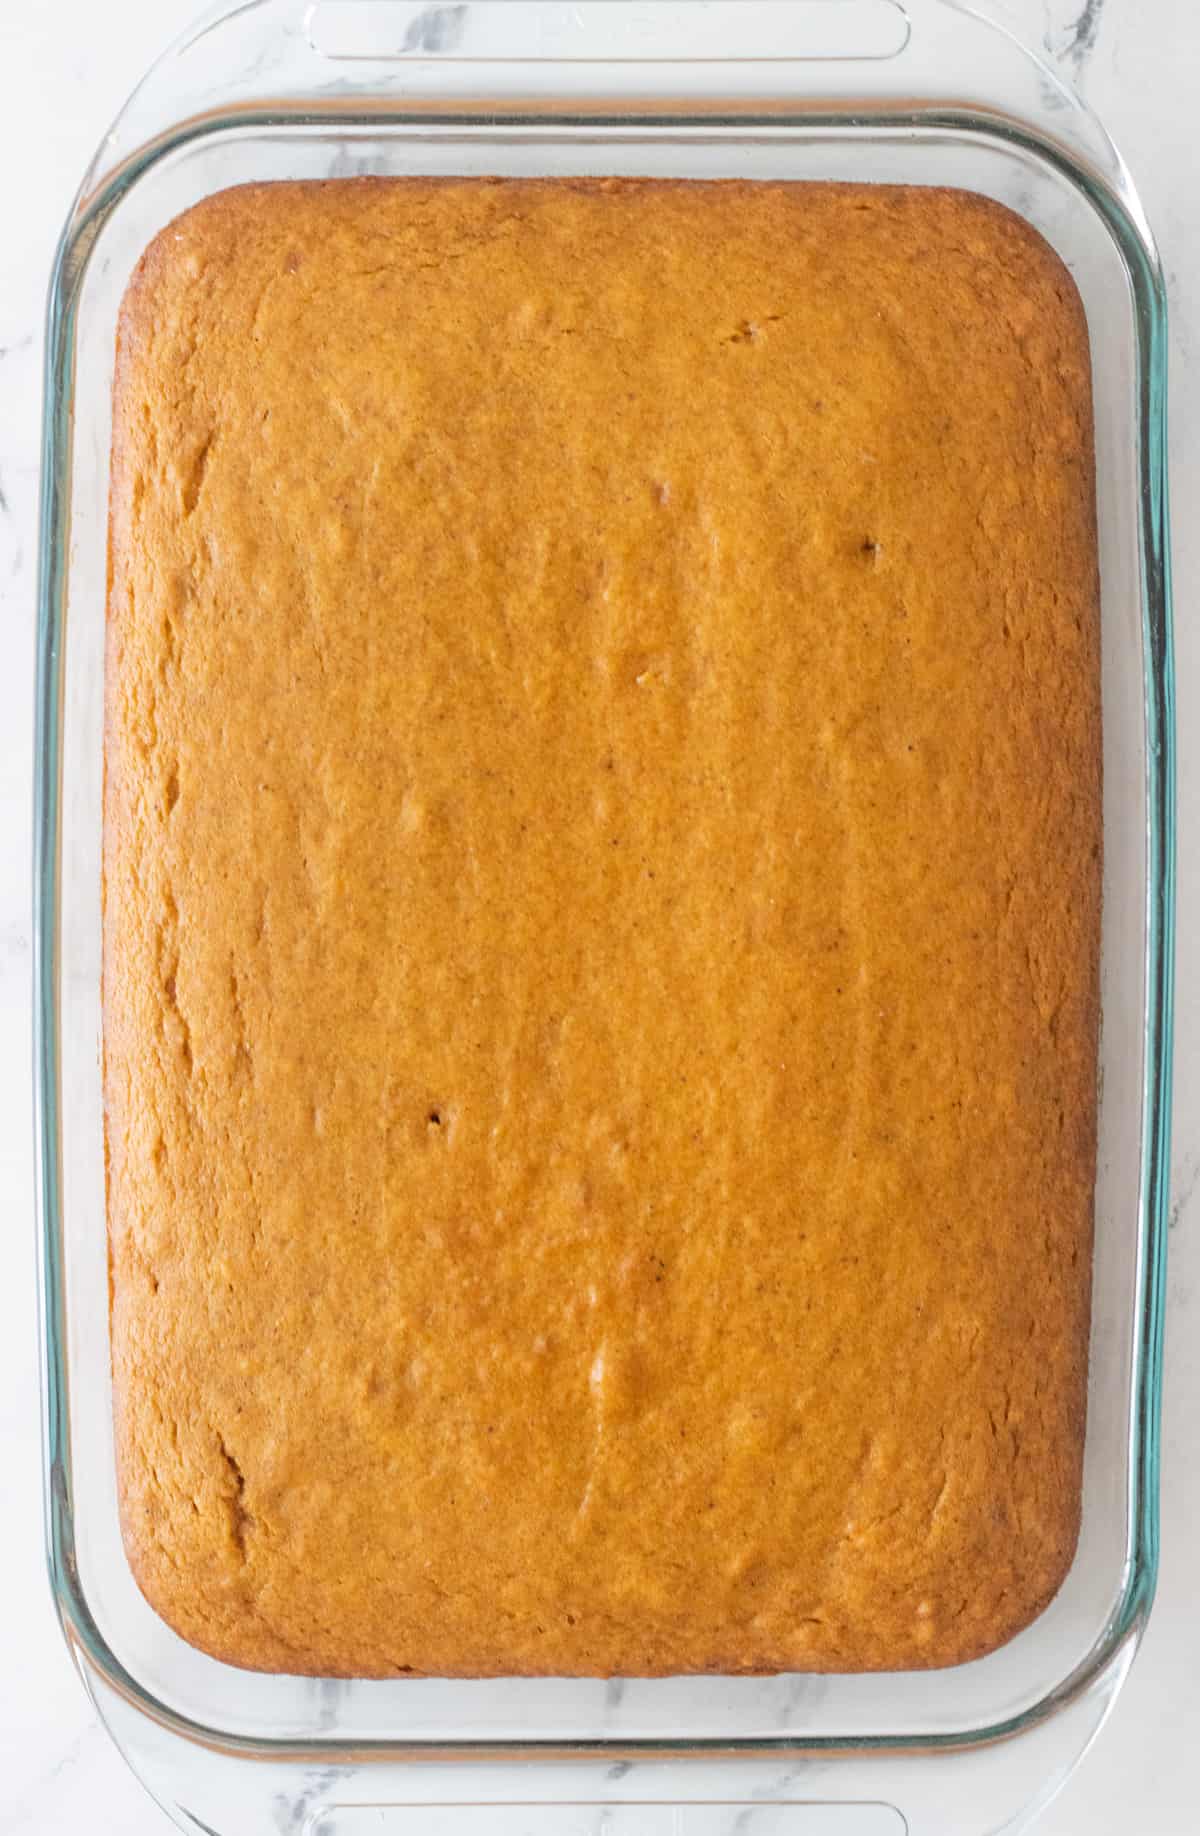 Unfrosted pumpkin cake in a 9x13 glass baking dish.